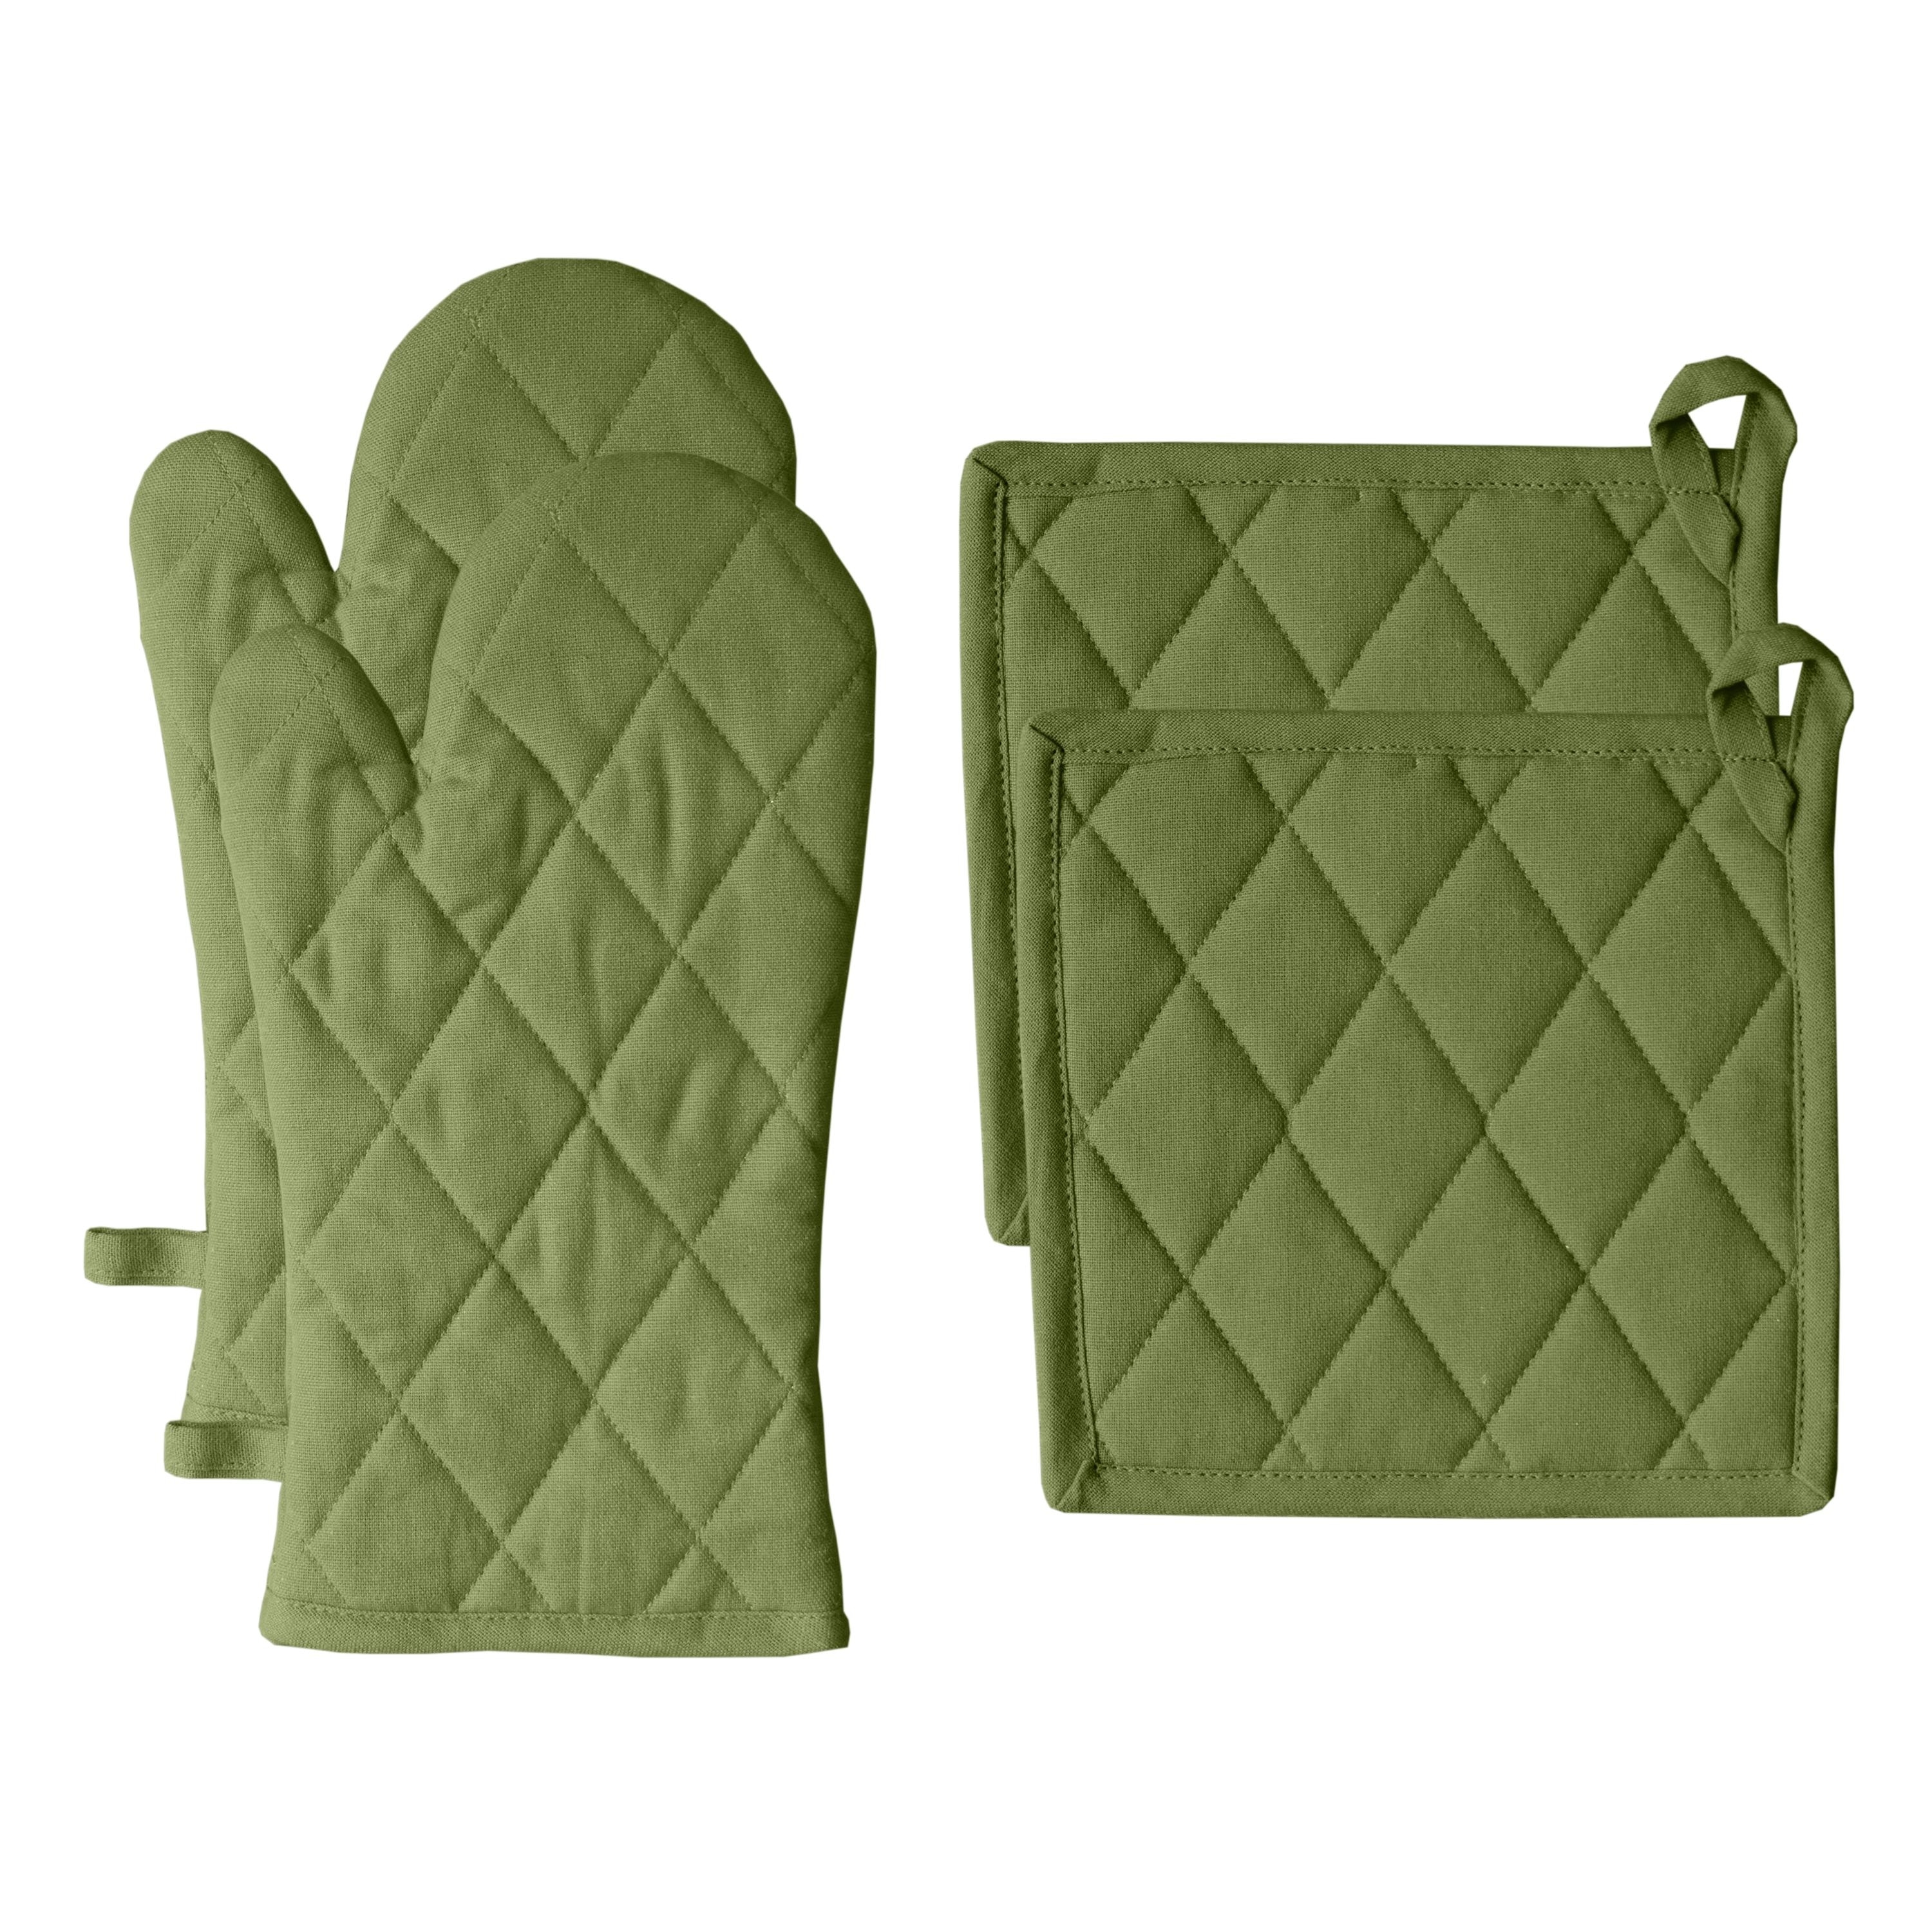 Pot Holders & Oven Mitts - CAPERS Home